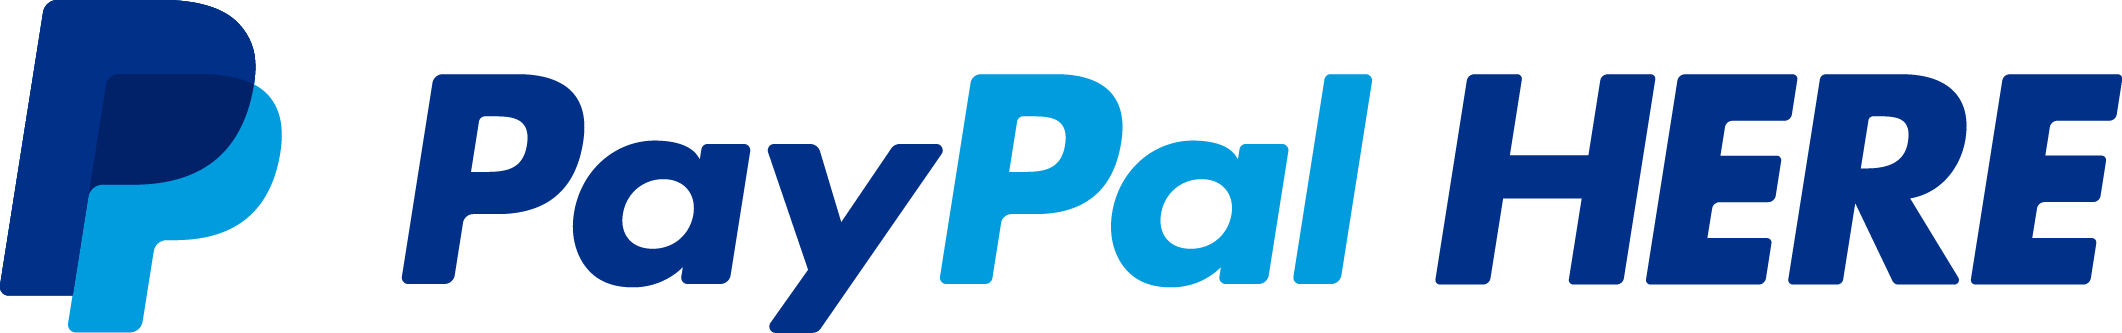 PayPal Accepted Here Logo - Sign Up For PayPal Here